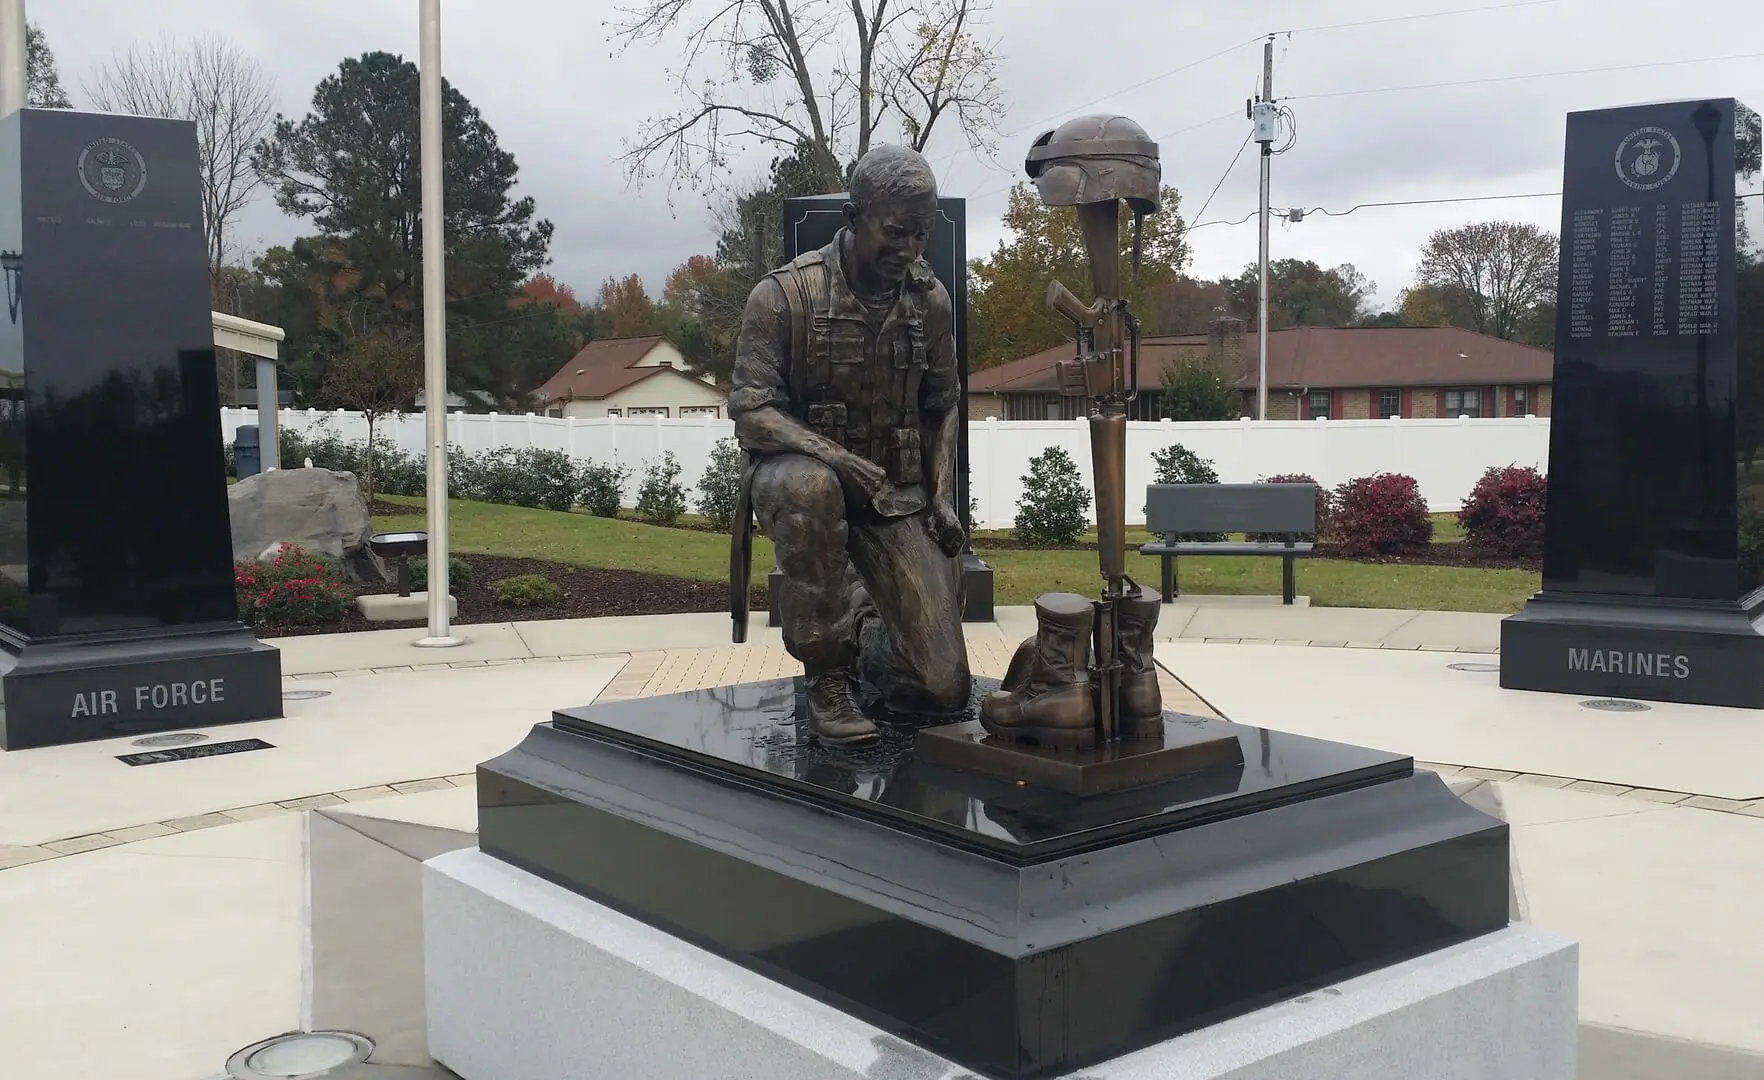 A statue of a war soldier with guns and boots